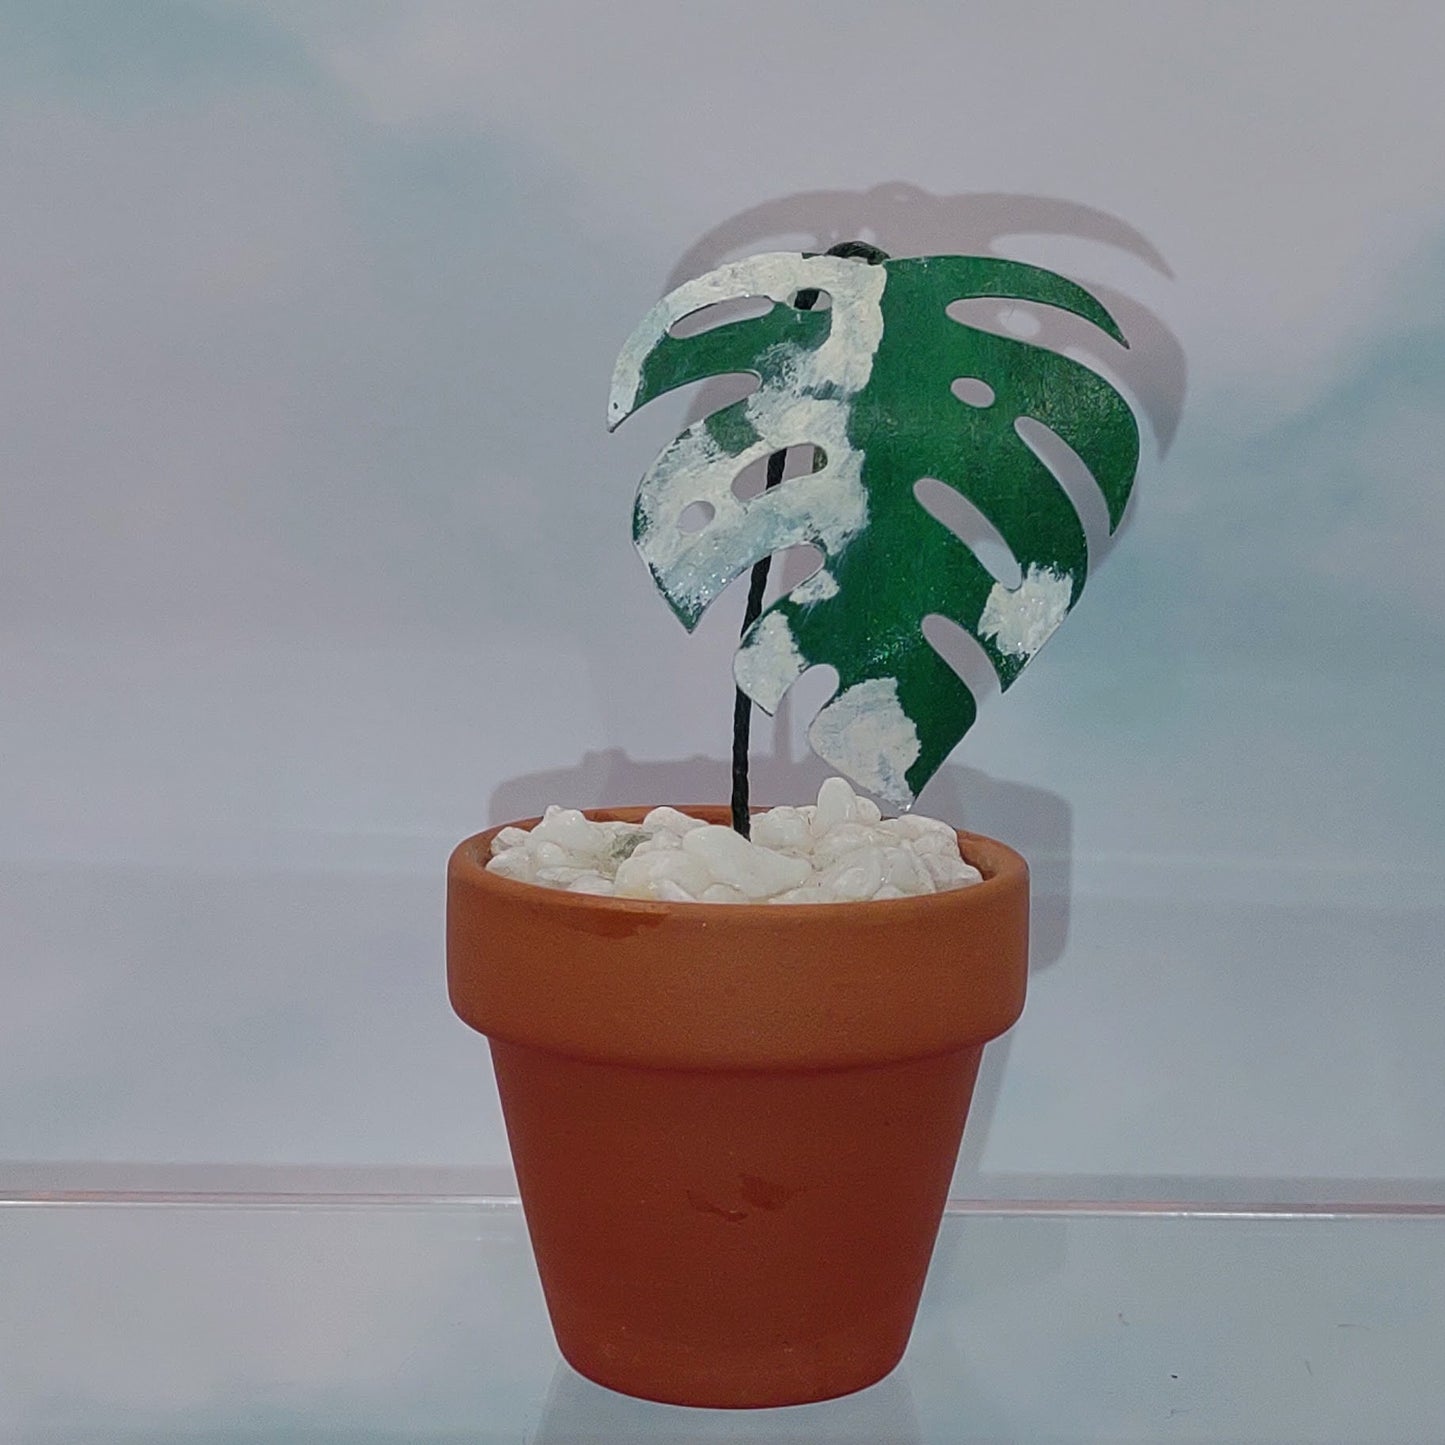 Tiny Magical Monstera Albo Paper House Plant in Clay Pot- DECORATIVE